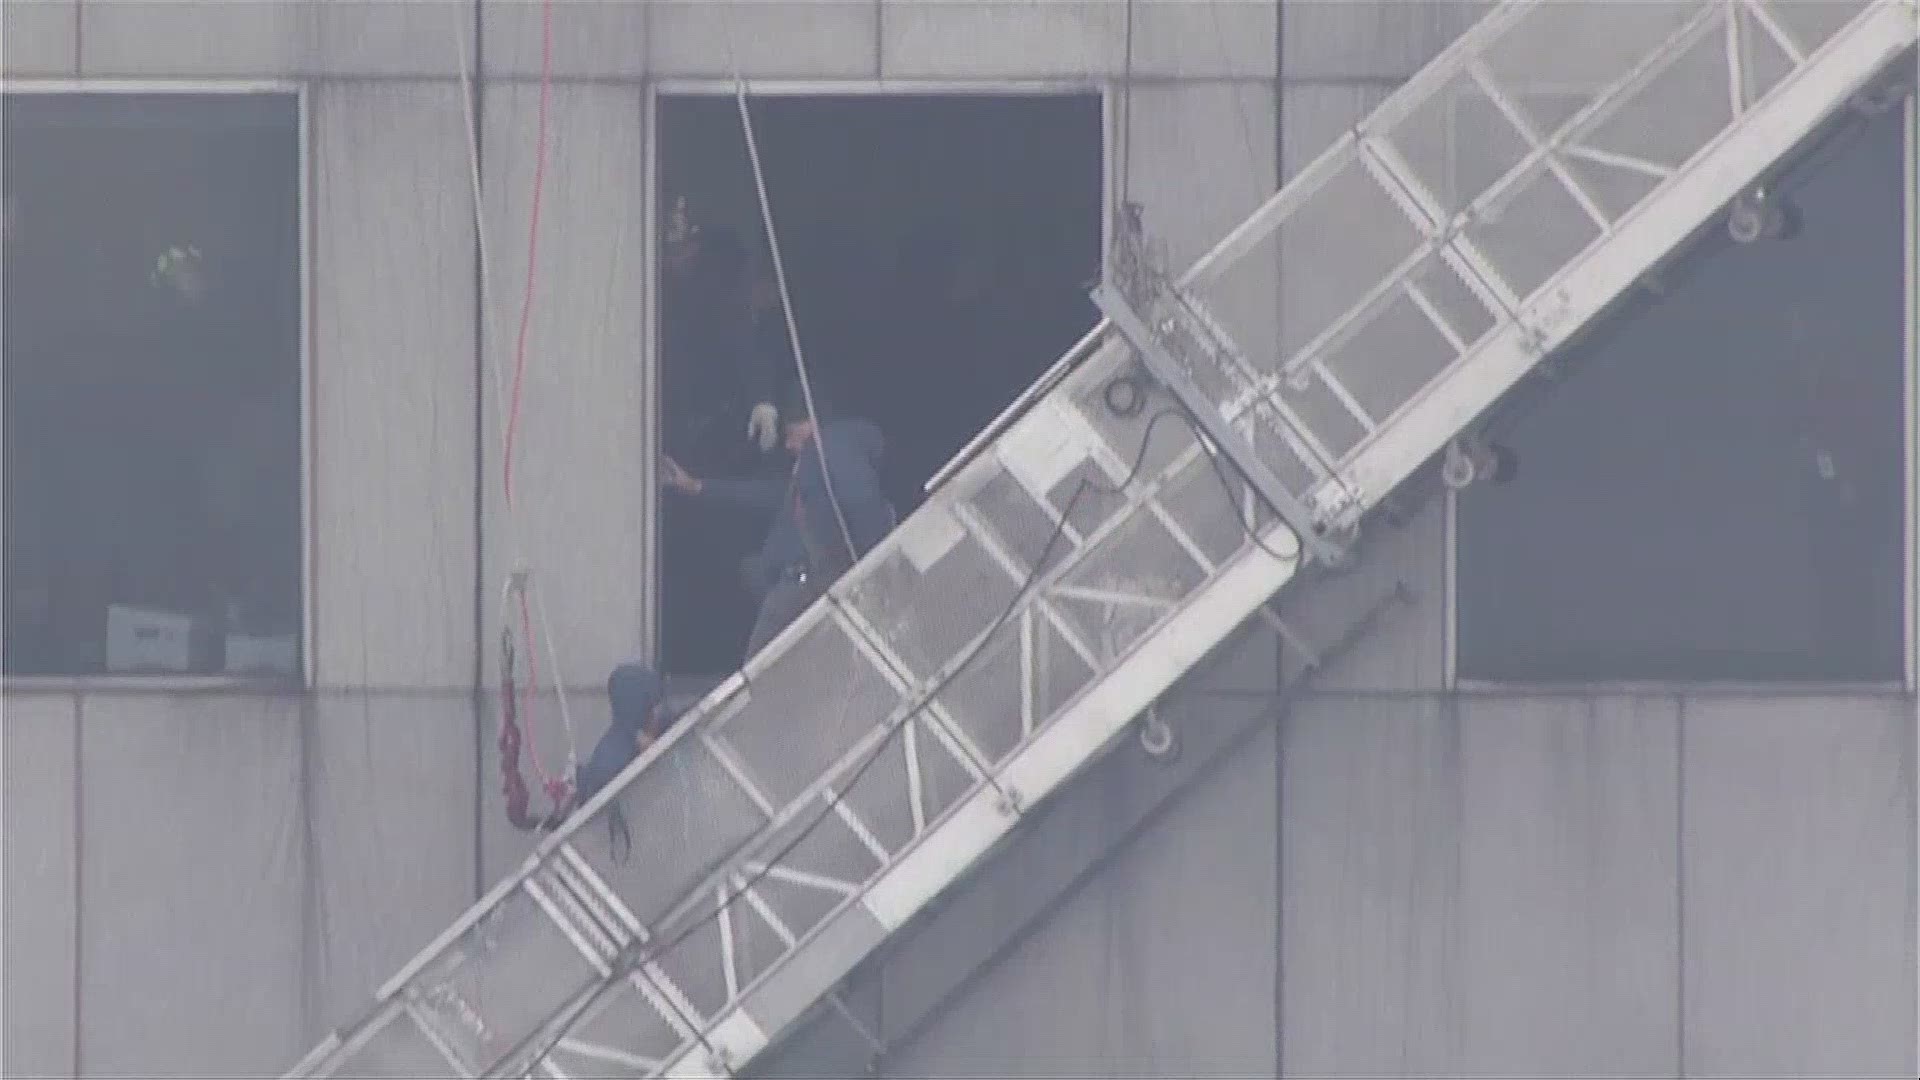 Firefighters rescued window washers stranded 71 floors above downtown Houston. (Video: NBC/KPRC)